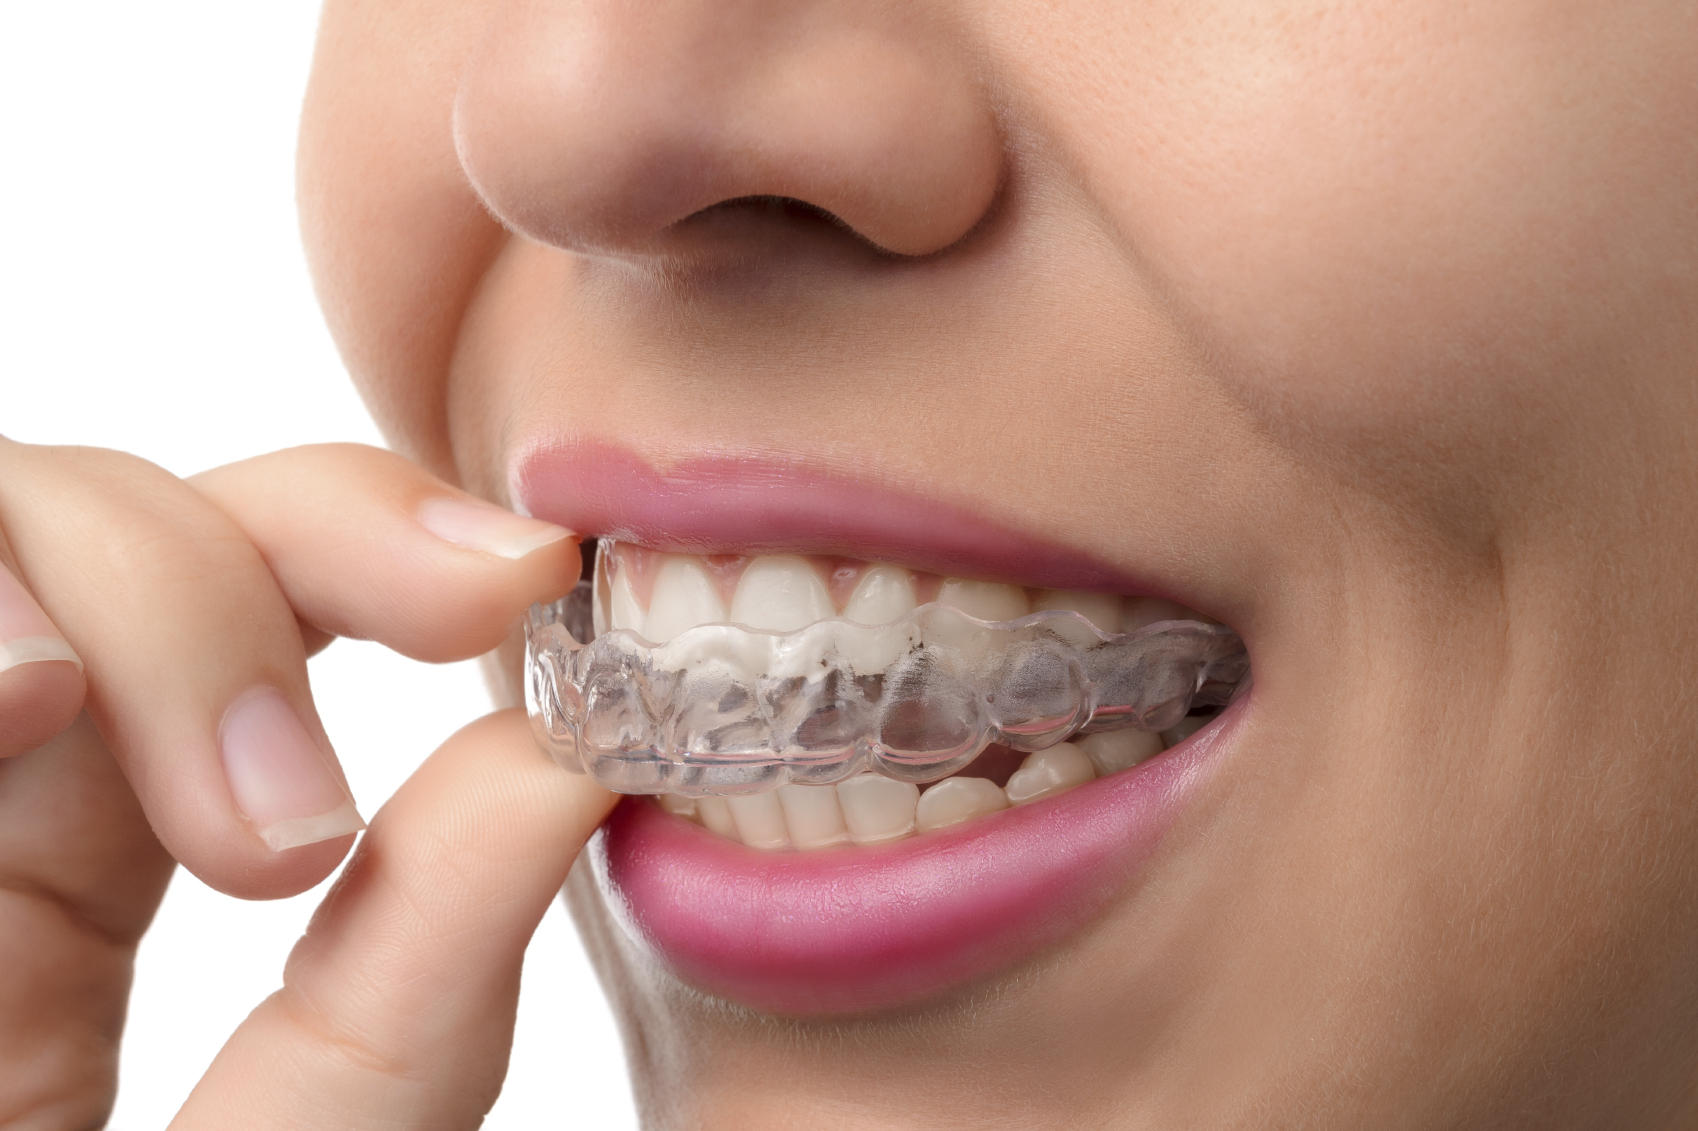 This is the image for the news article titled The Clear Pros of Invisalign Teen